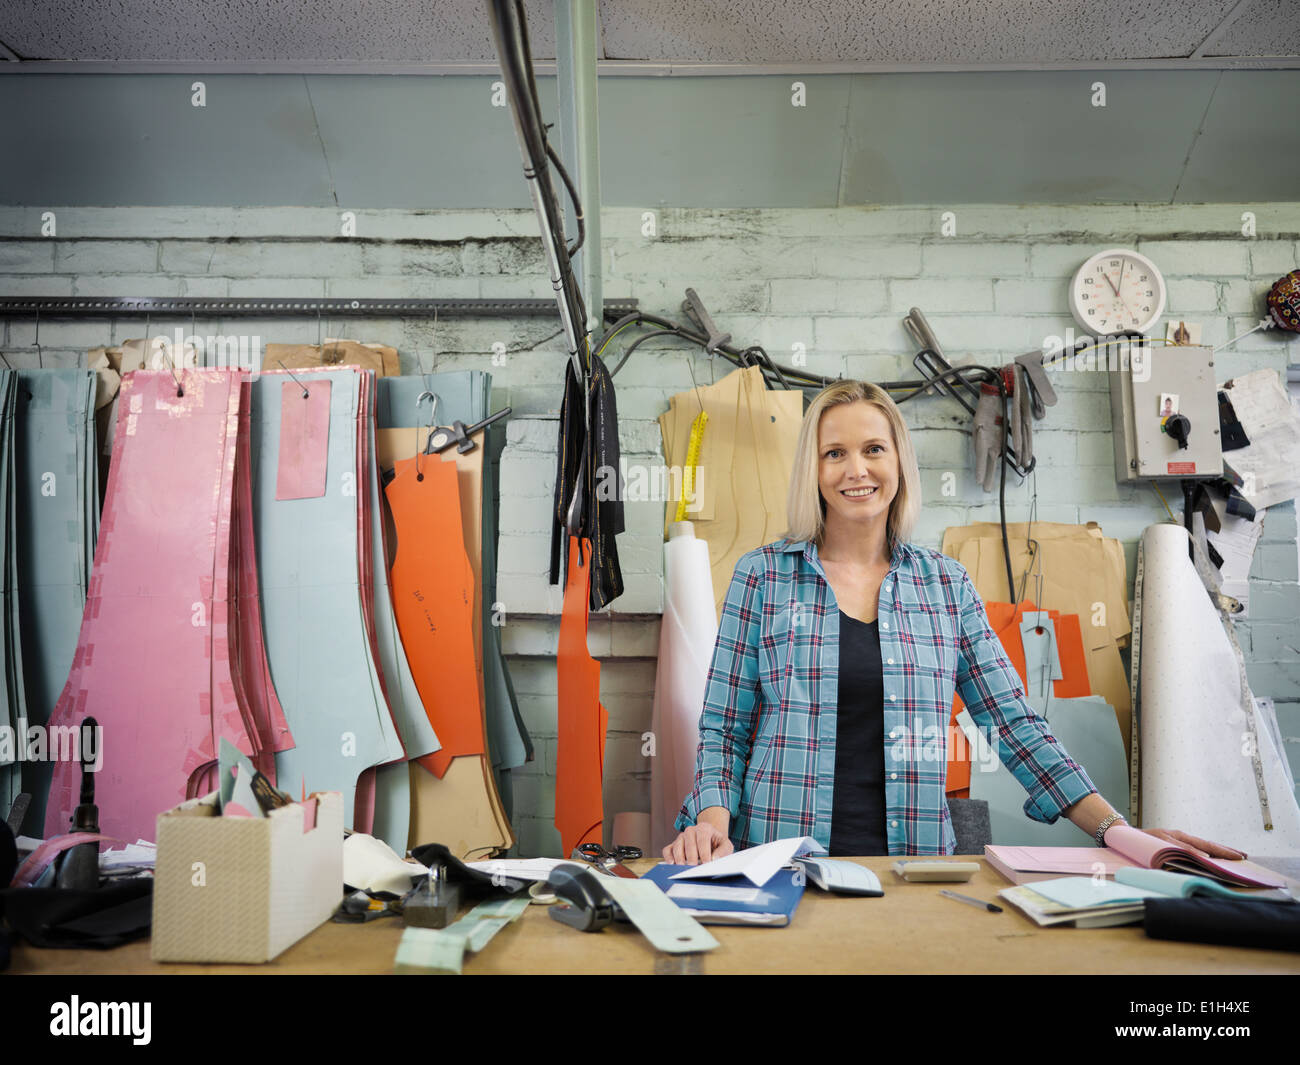 Portrait of fashion designer at cutting desk in clothing factory, smiling Stock Photo